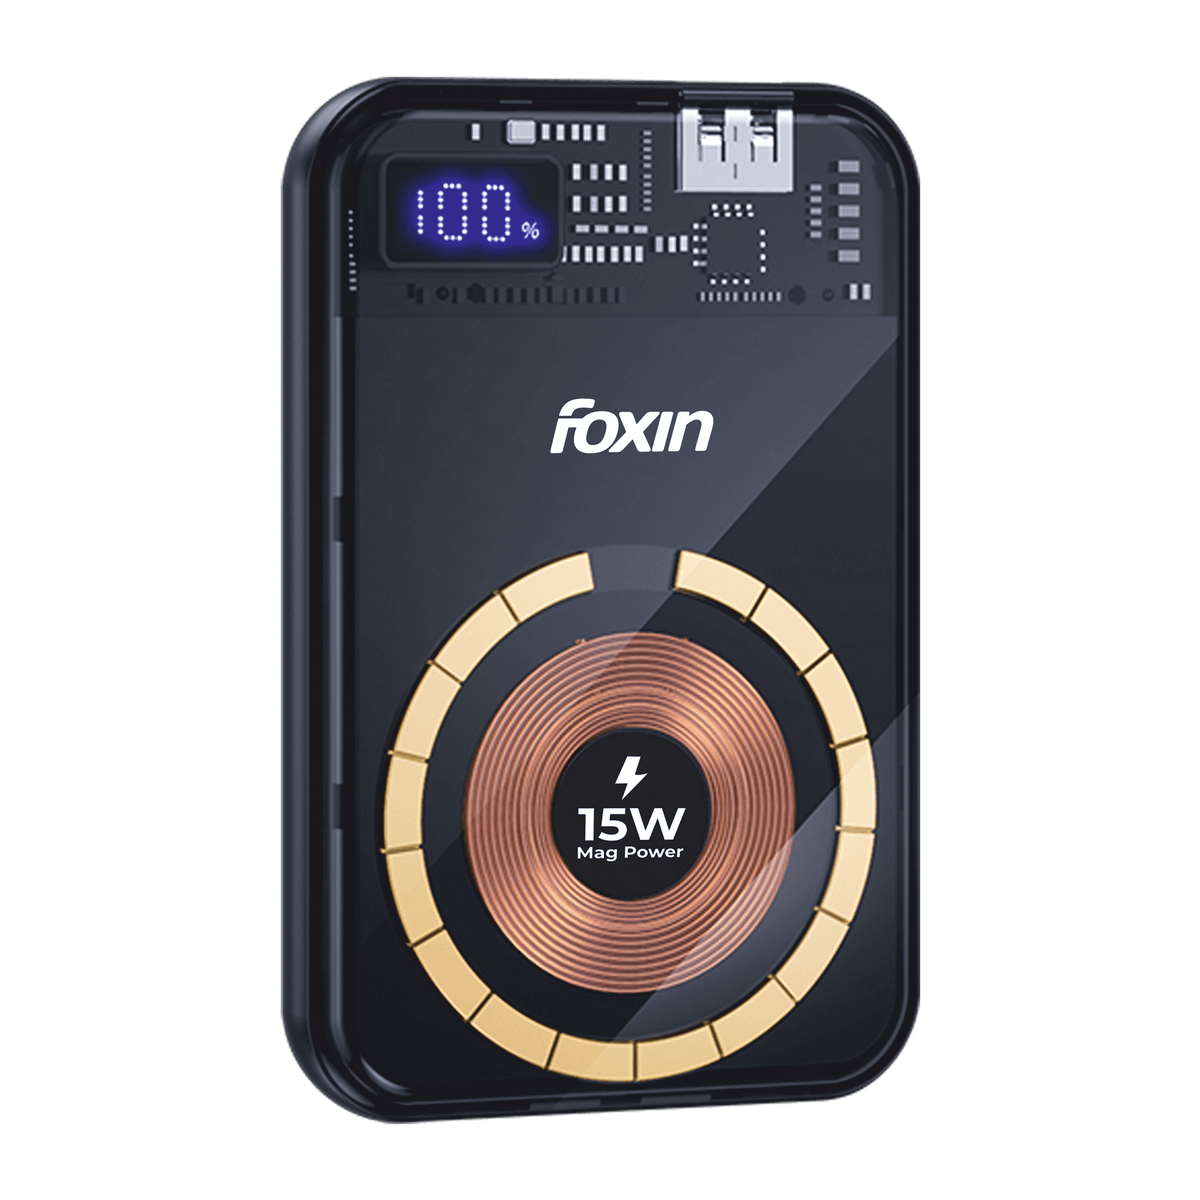 Foxin Mag 15 Pro Wireless Power Bank 10,000 mAh | 22.5W QC+PD Fast Charging | BIS Certified